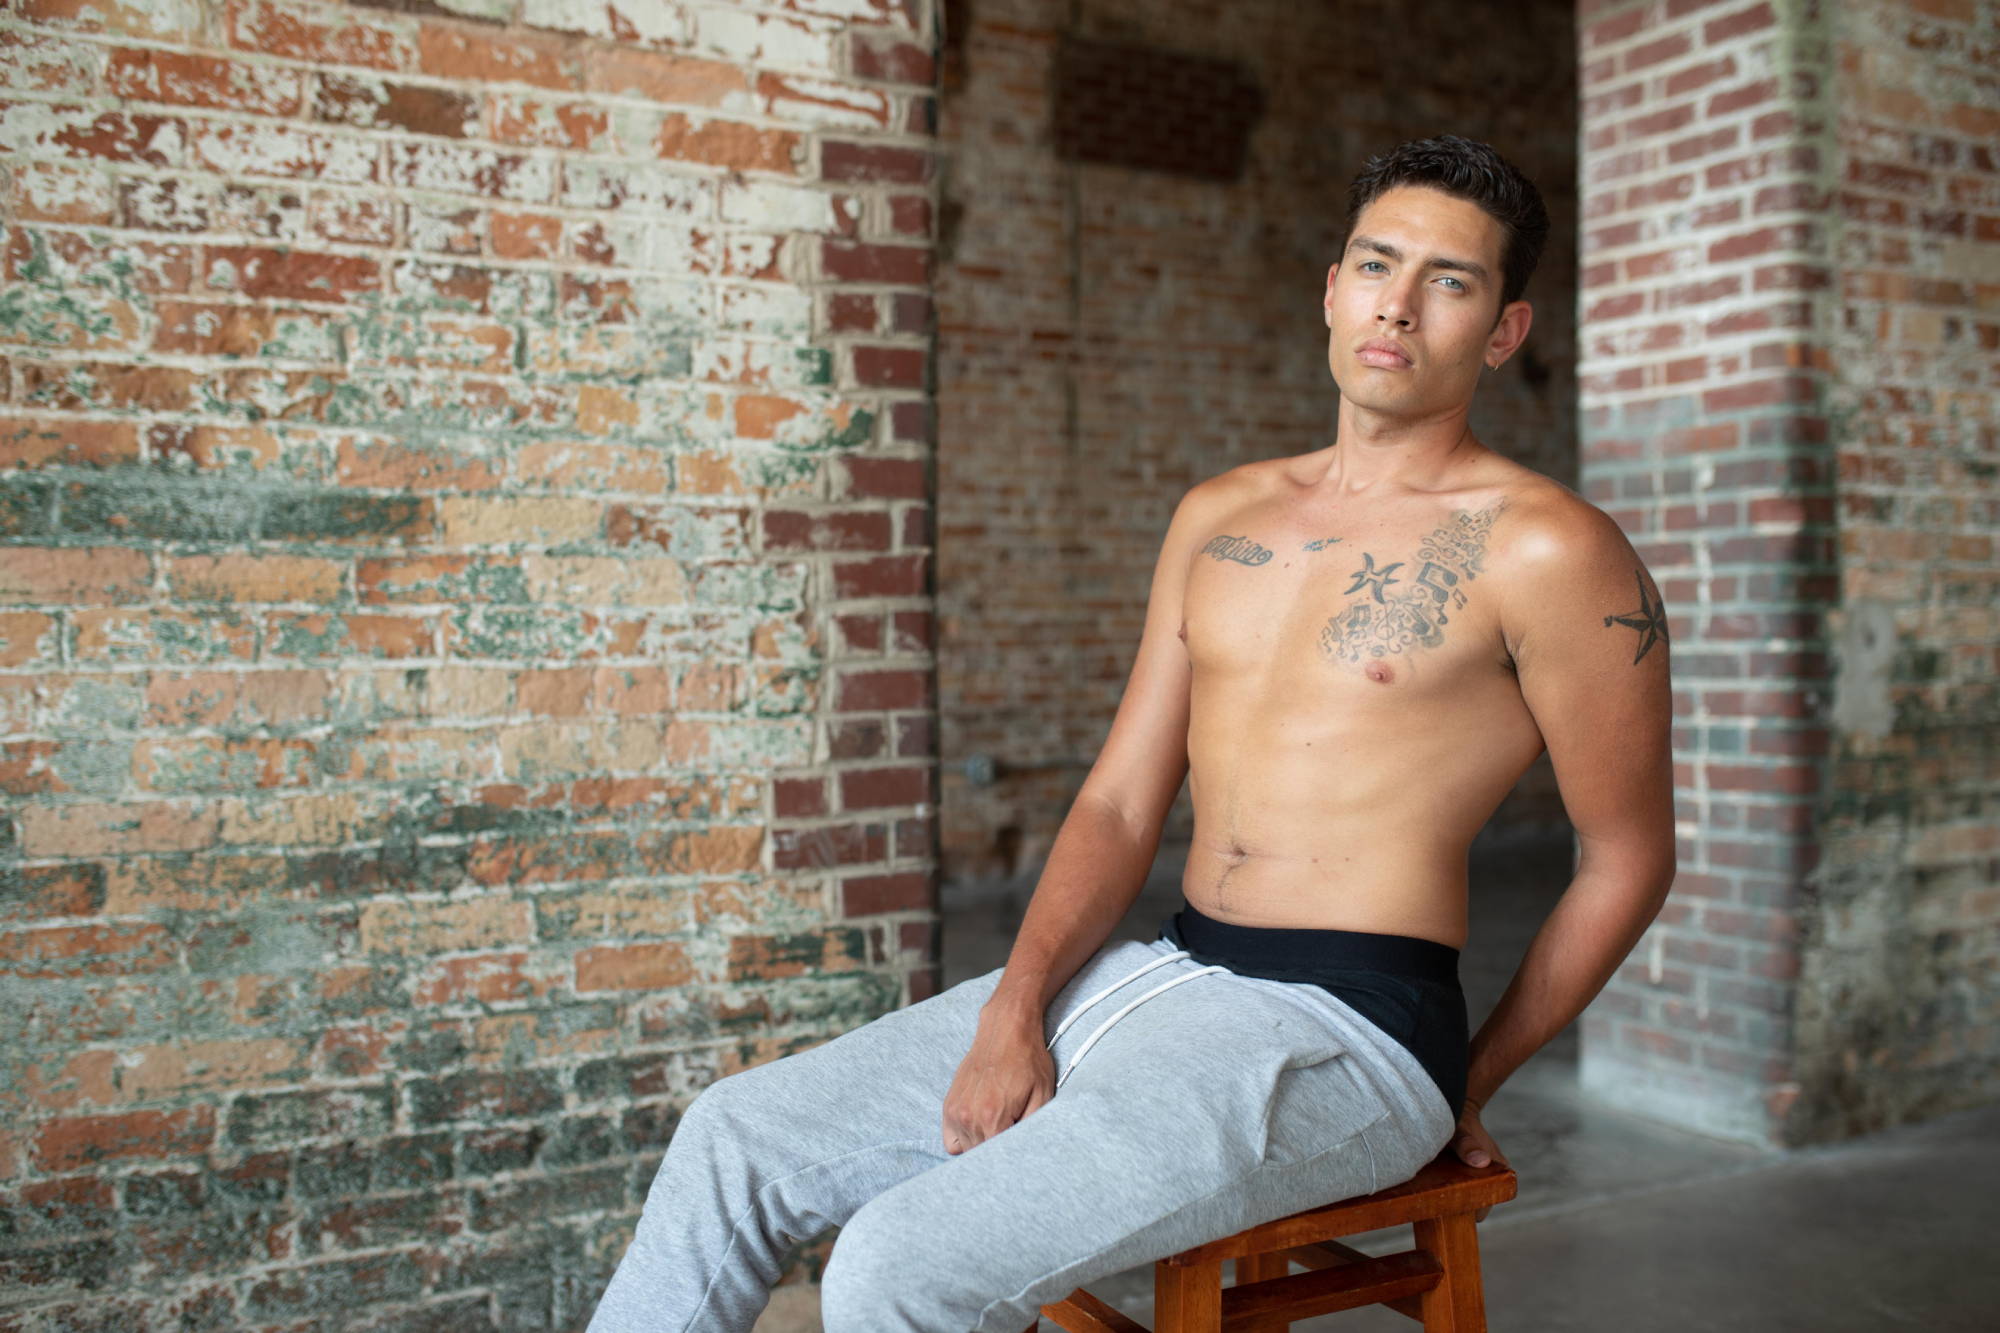 A man in gray sweats and black underwear sits on a wooden stool against a brick wall.